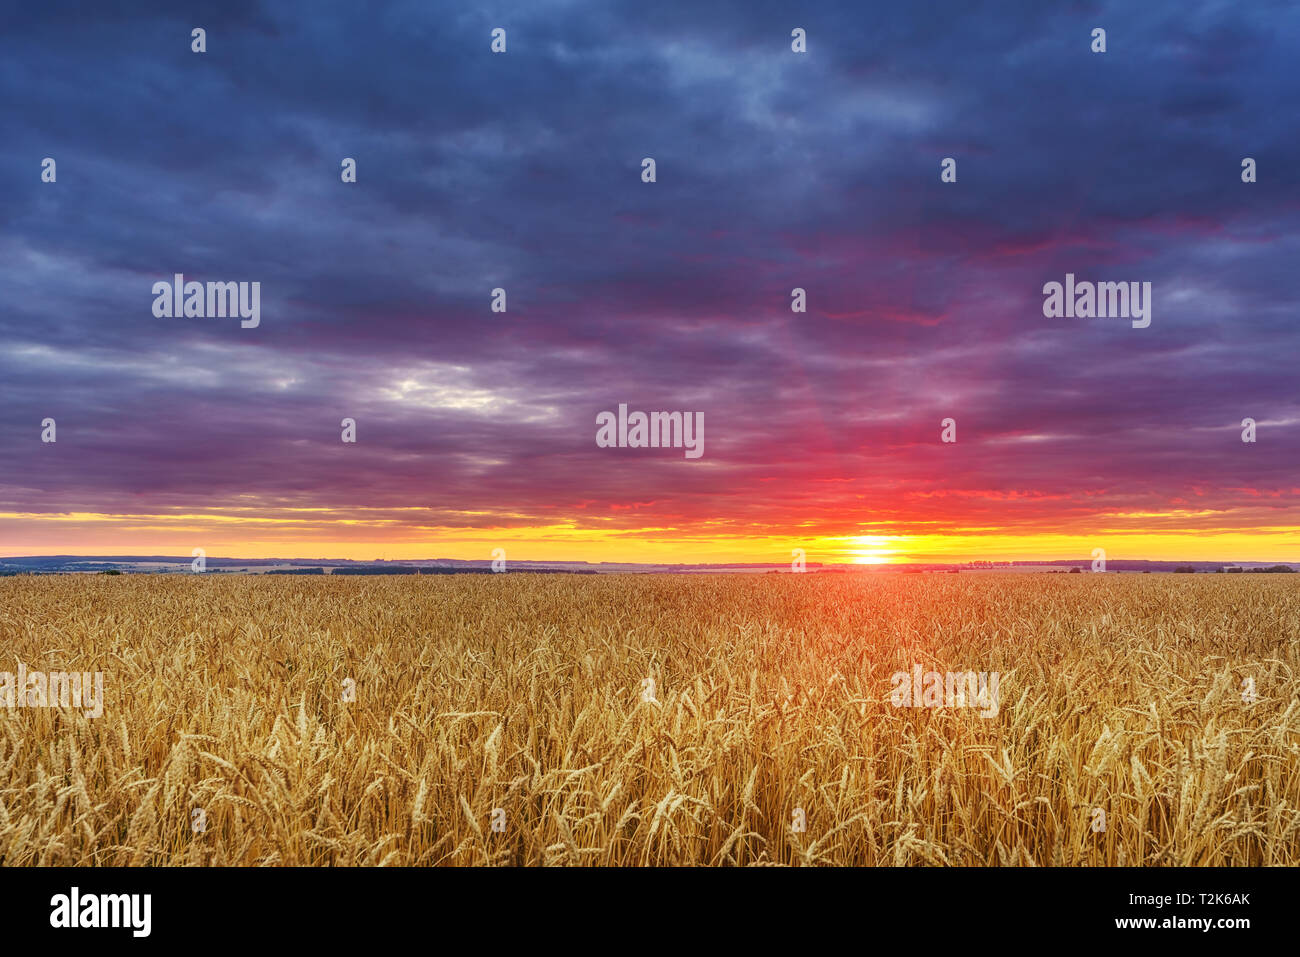 Dramatic sunset above the wheat field in european countryside Stock Photo